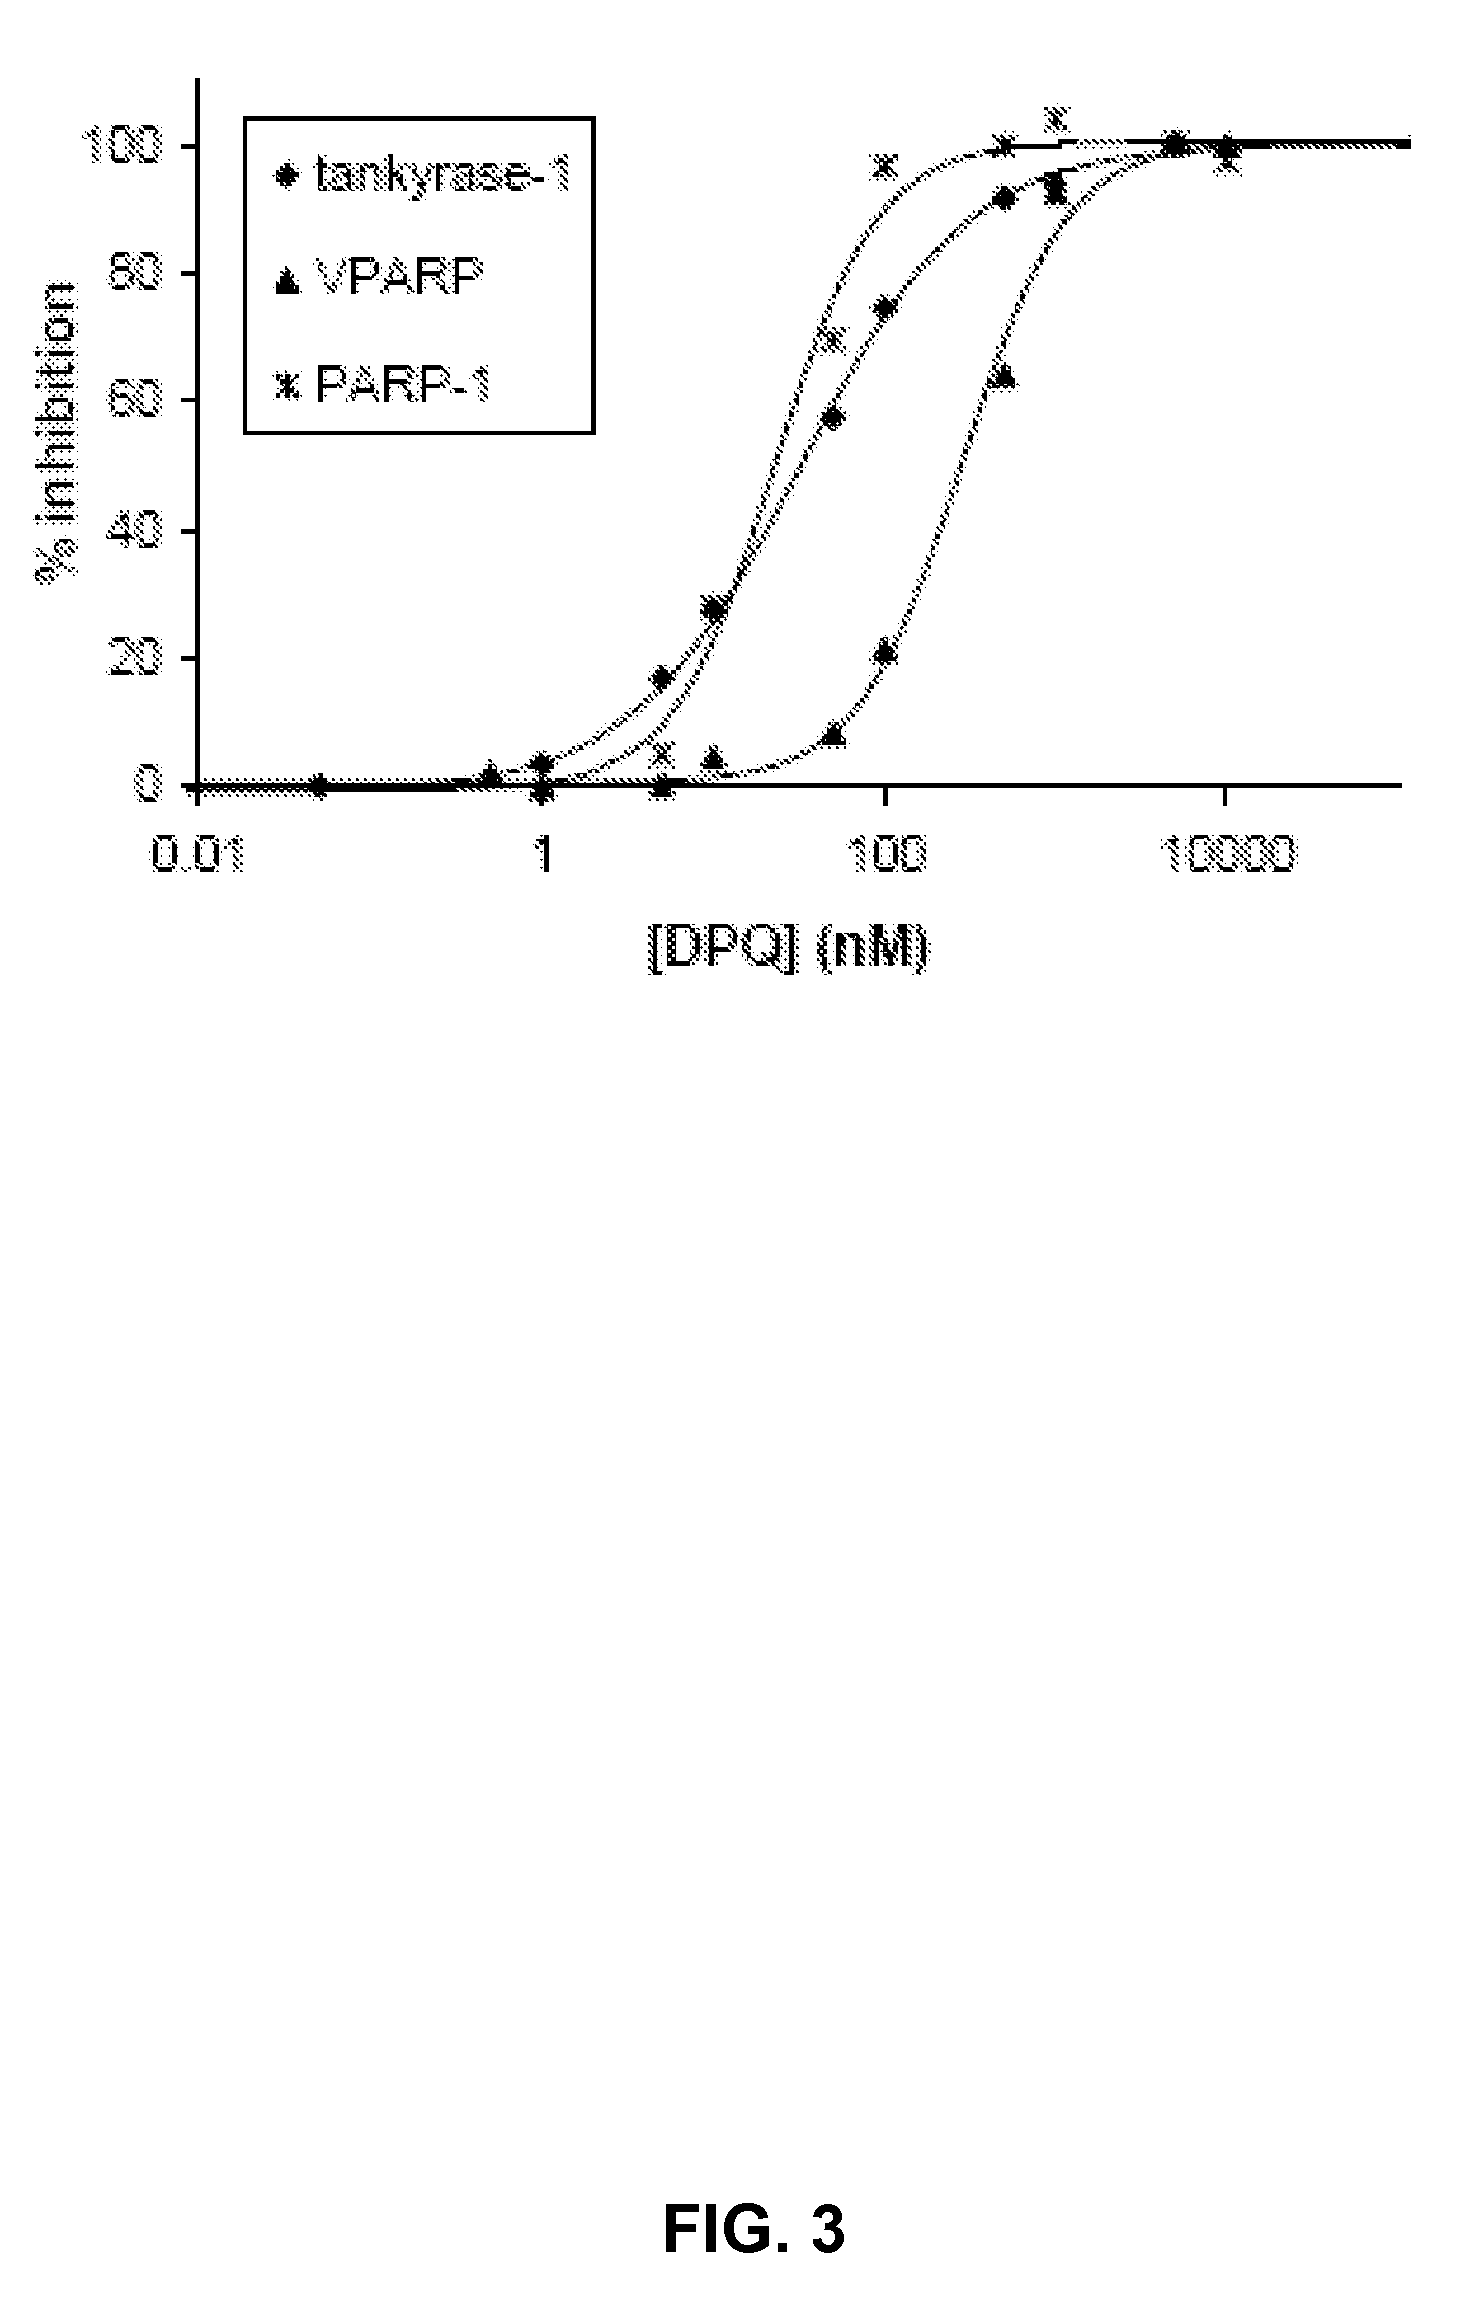 Colorimetric Substrate and Methods for Detecting Poly(ADP-ribose) Polymerase Activity including PARP Enzymes PARP-1, VPARP, and Tankyrase-1